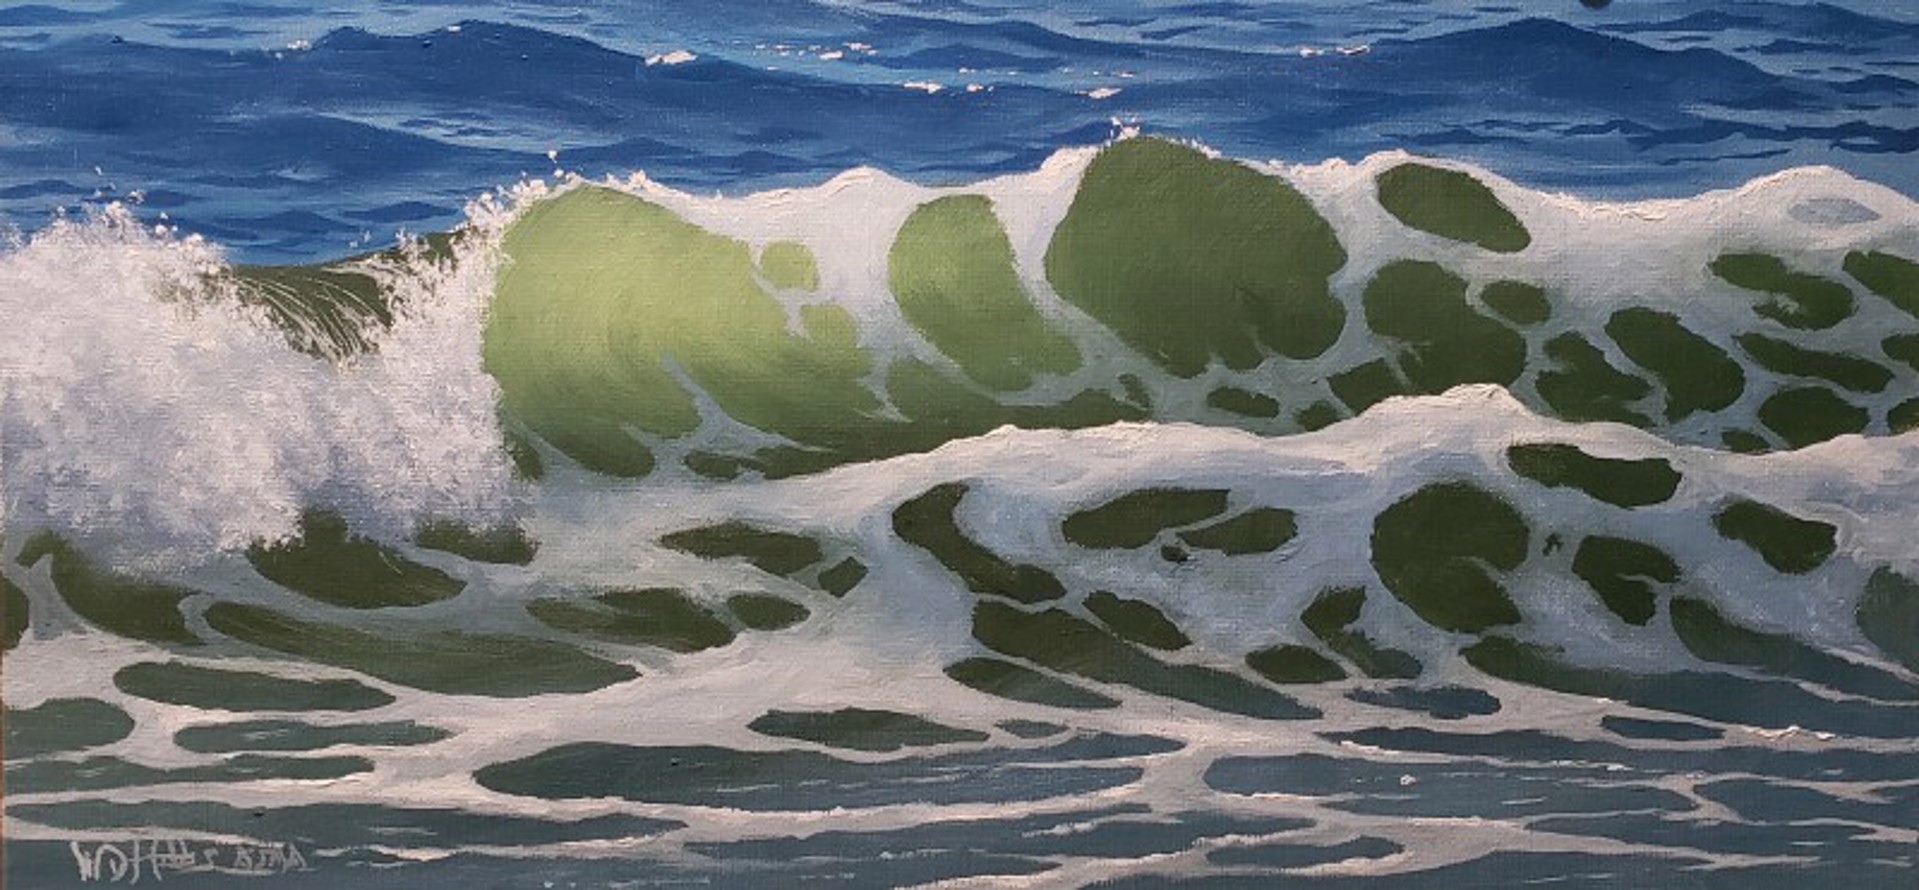 Study of Surf Dynamics by William D. Hobbs